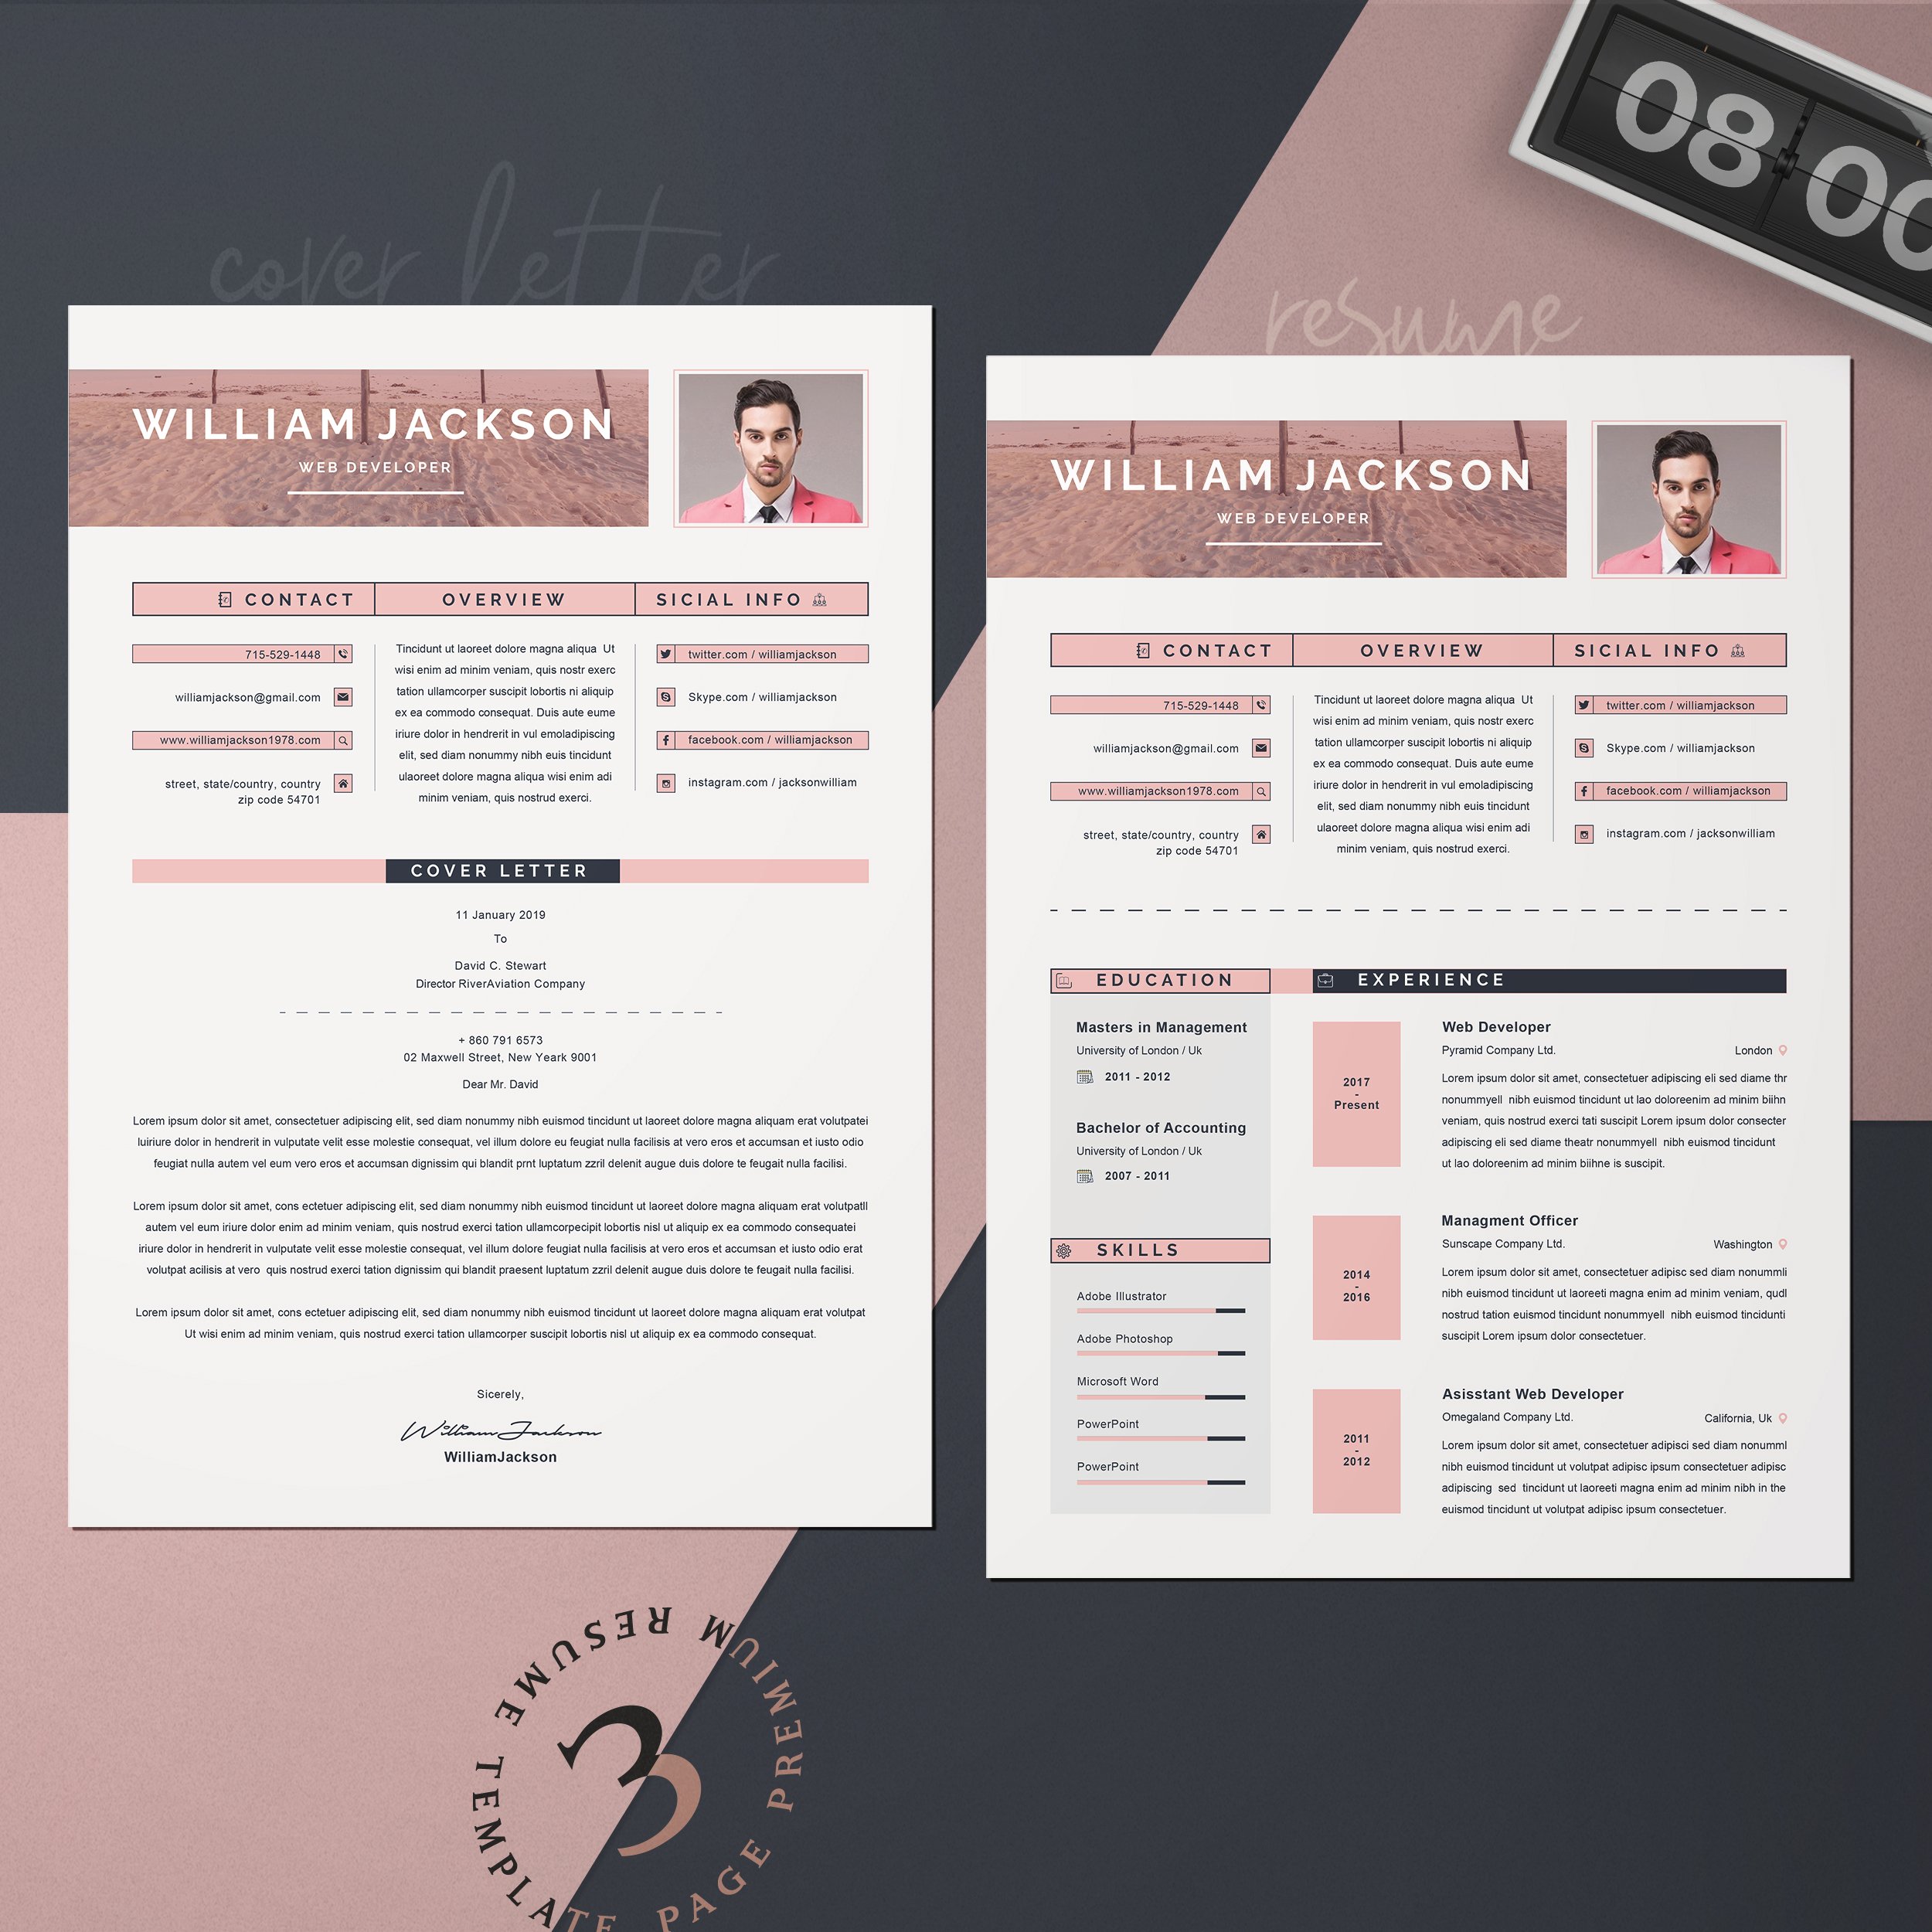 Professional resume and cover letter on a pink and black background.